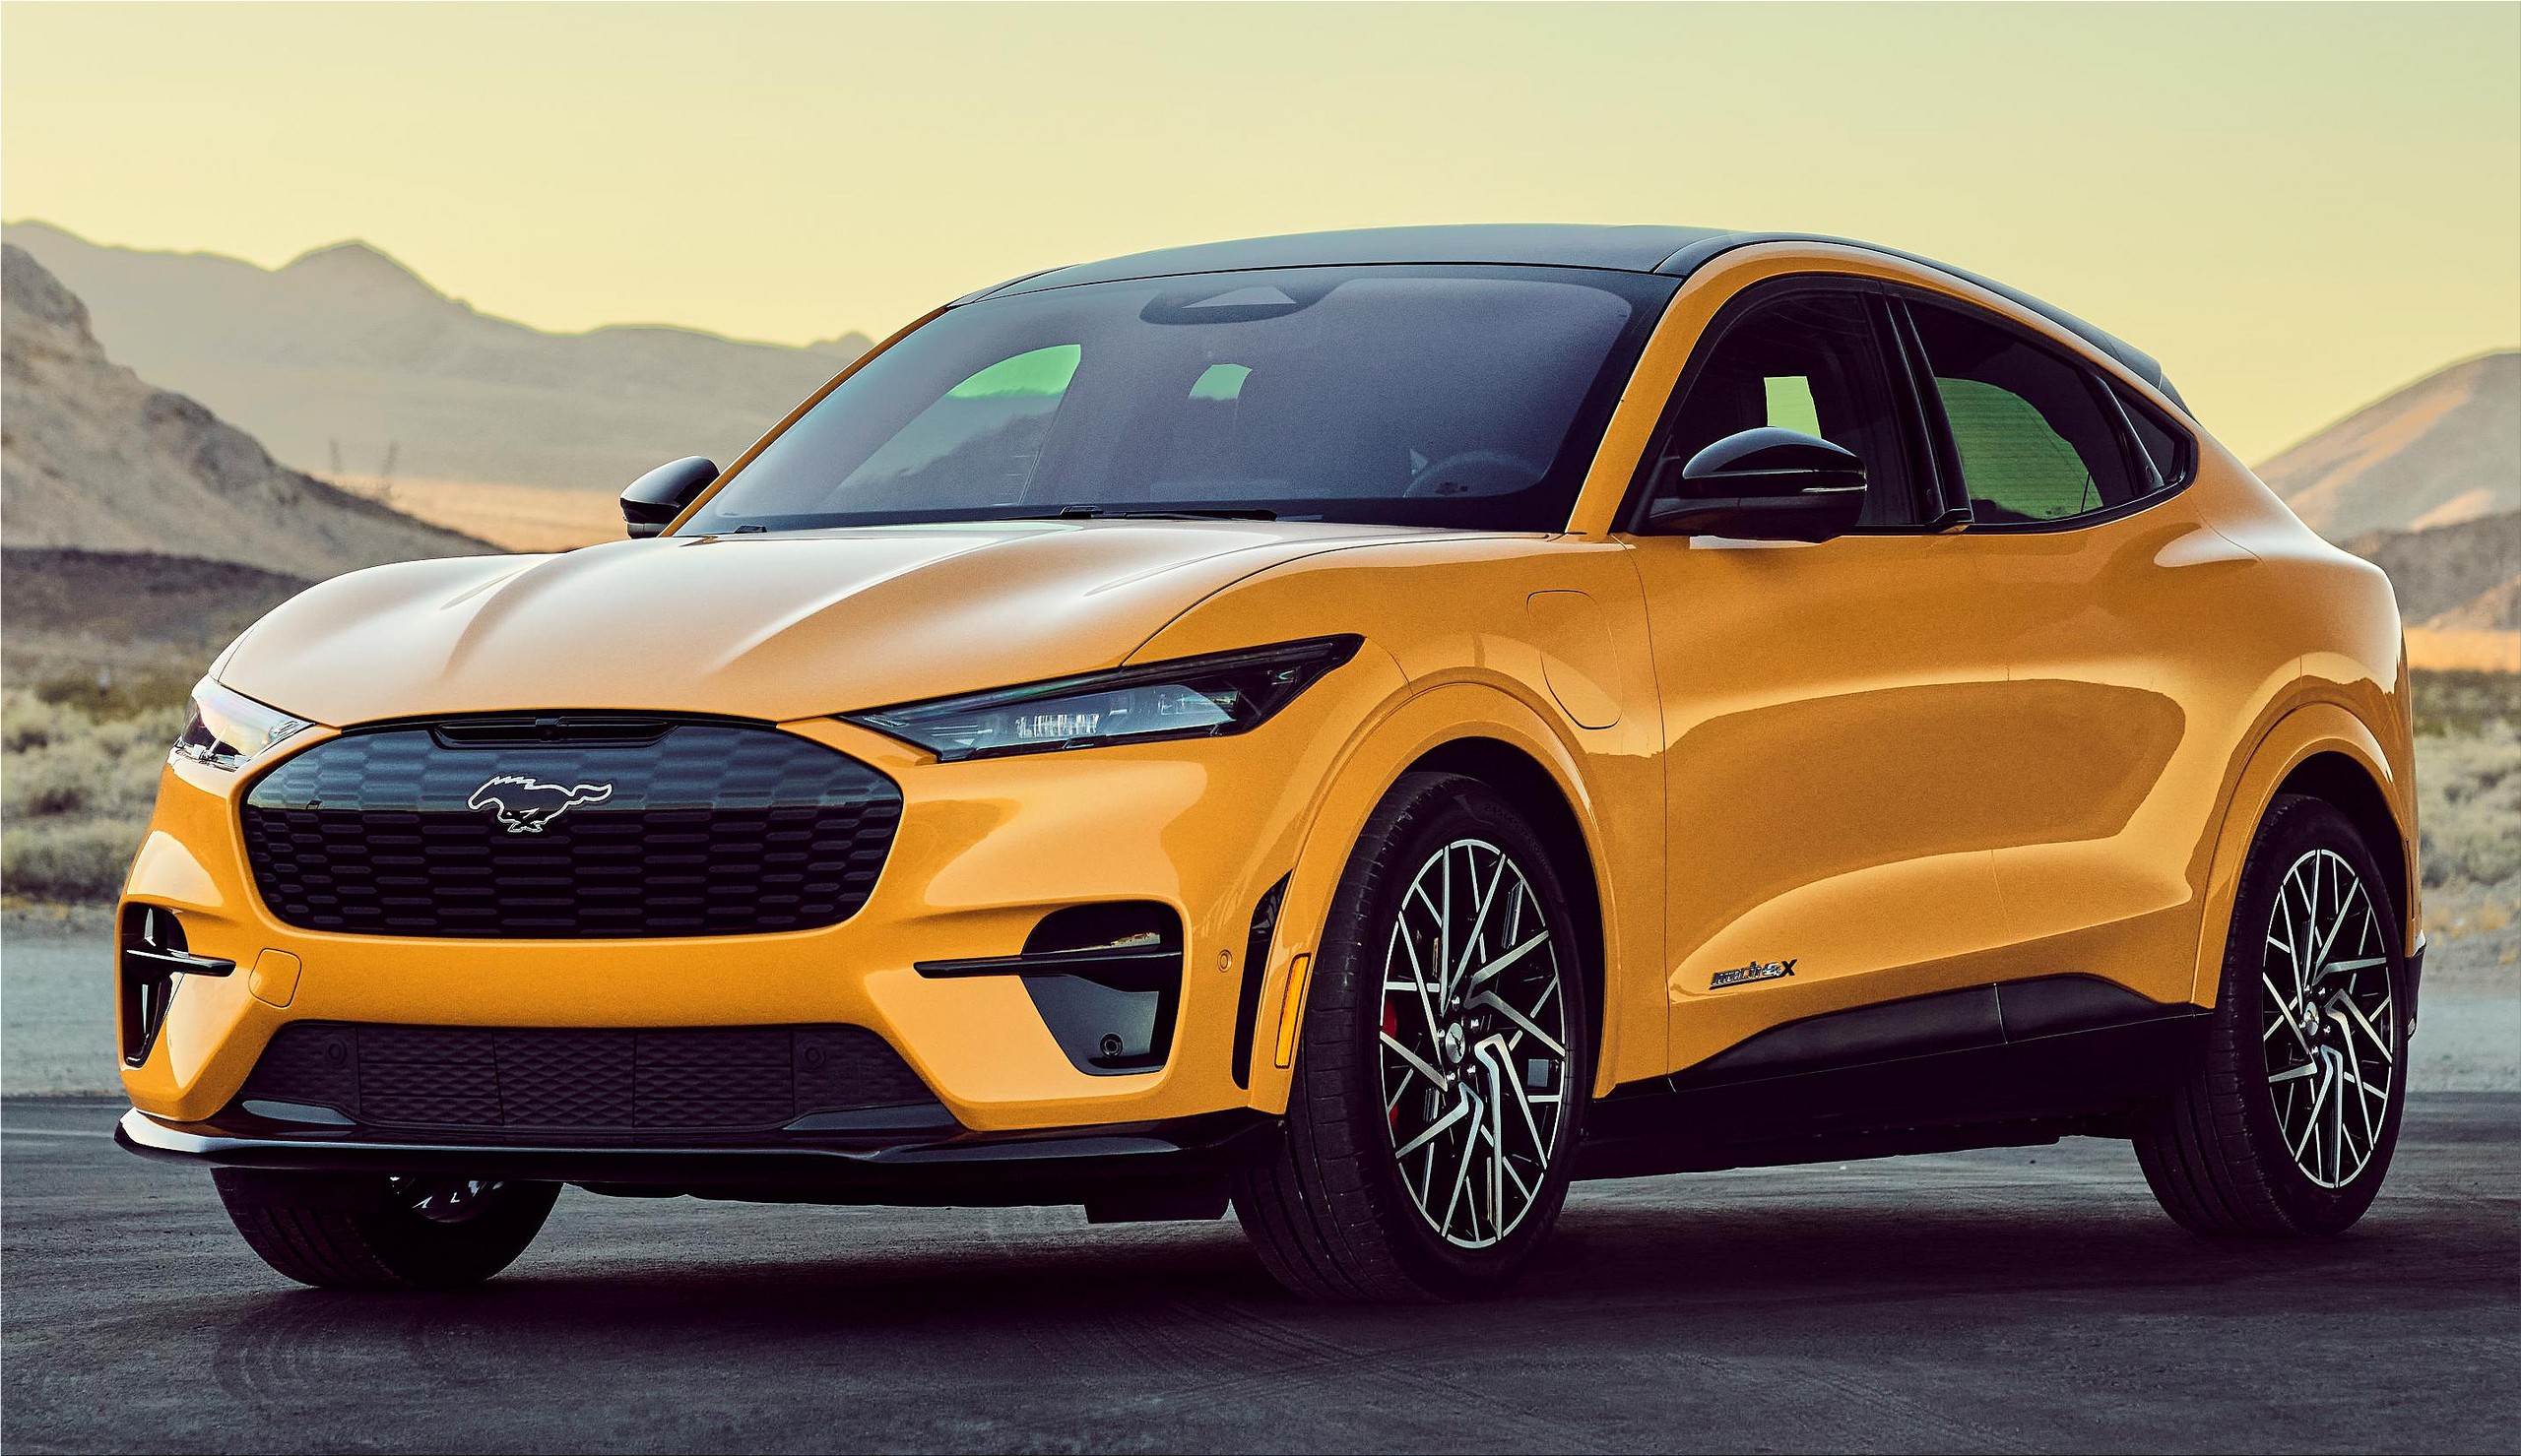 The 2021 Ford Mustang MachE allelectric SUV driving pleasure